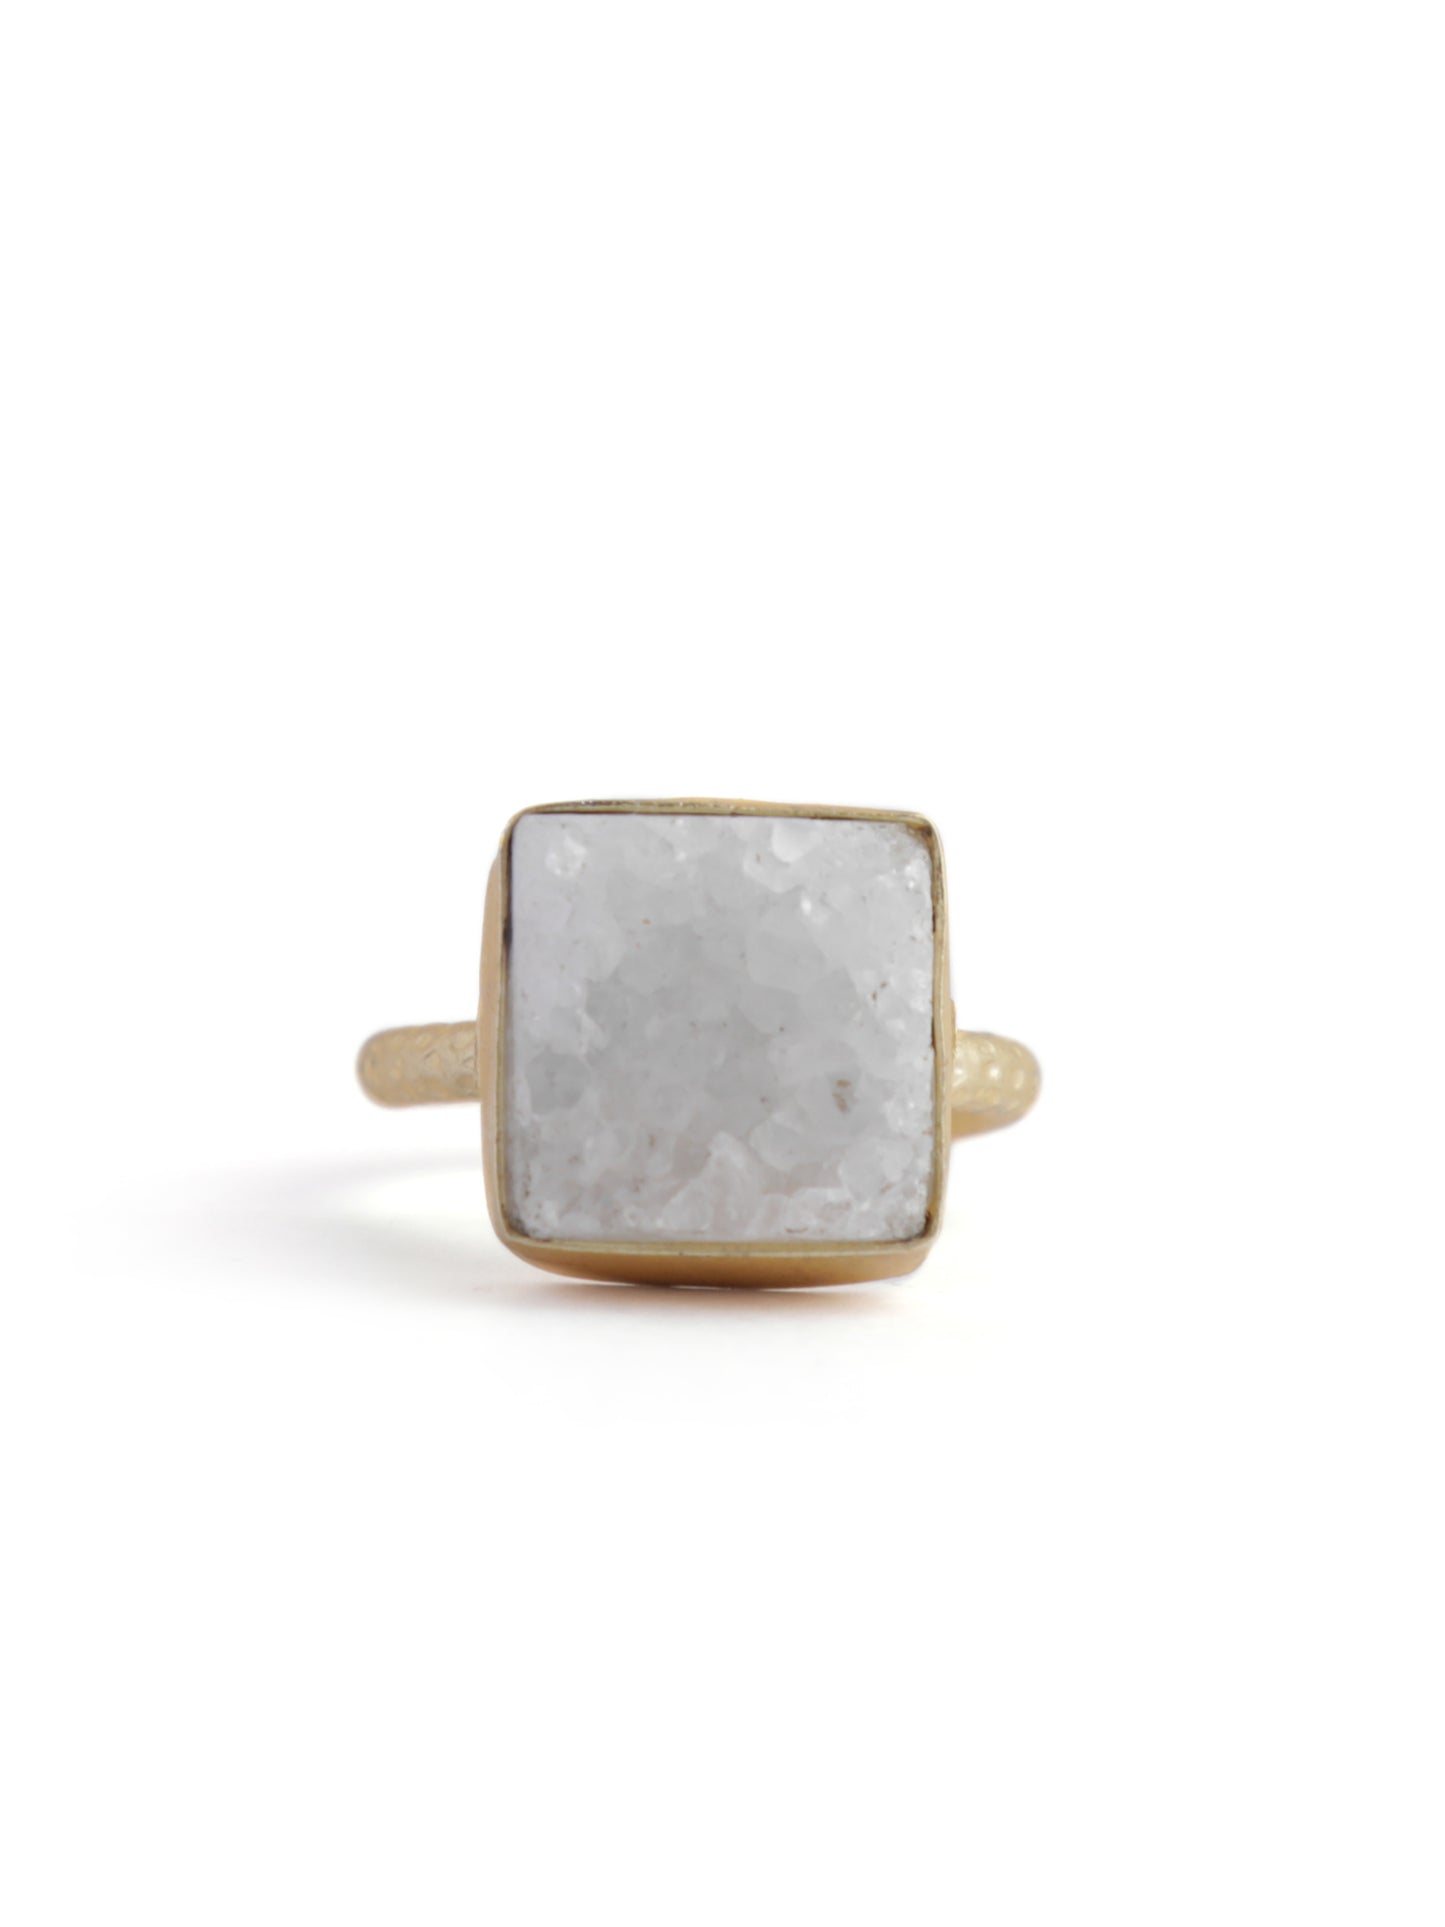 The White Agate Druzy Ring